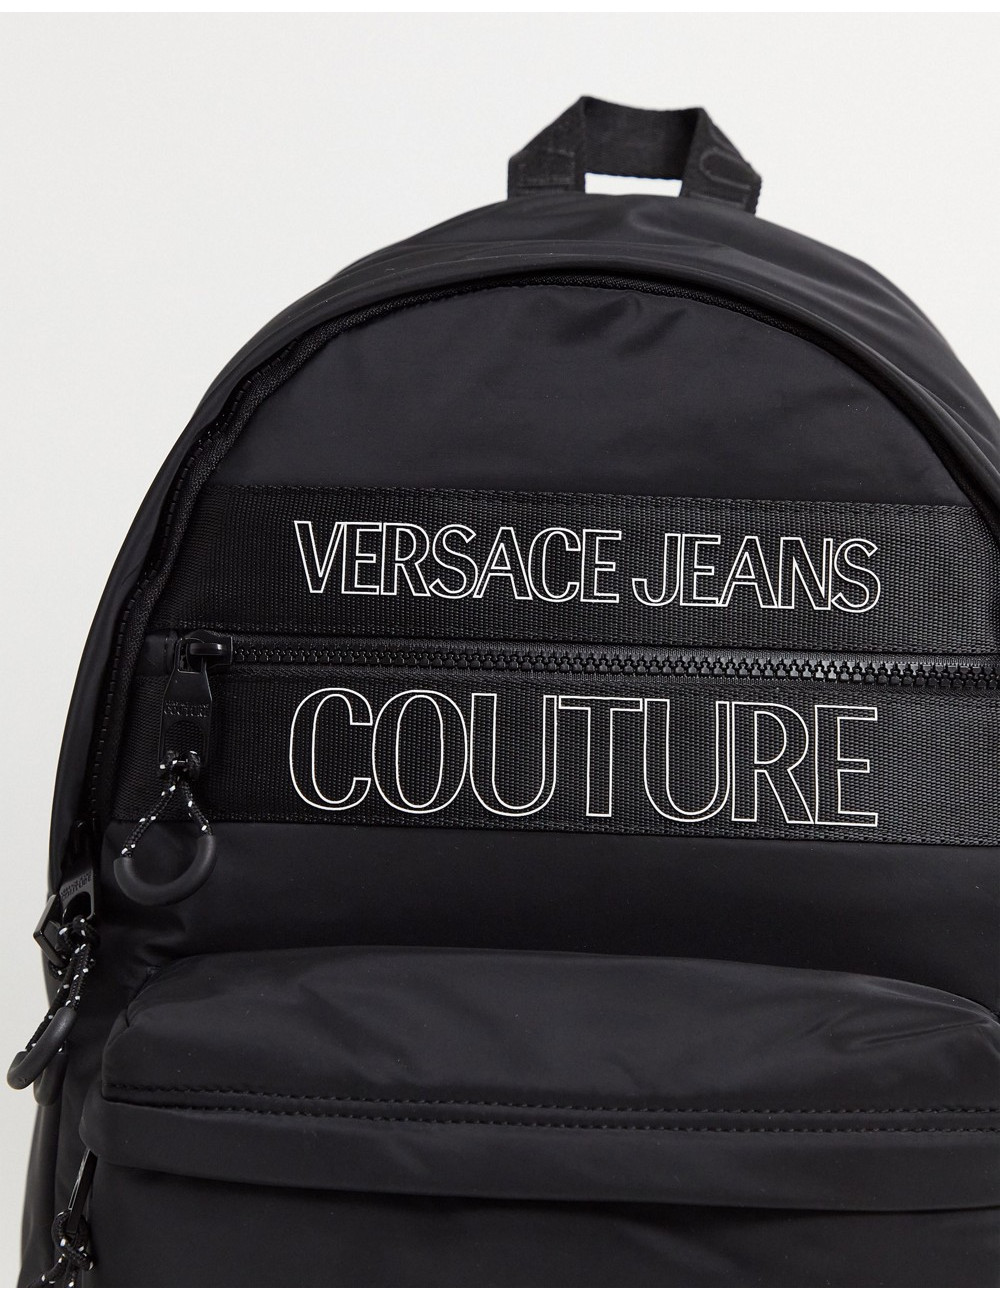 Versace Jeans Couture logo...